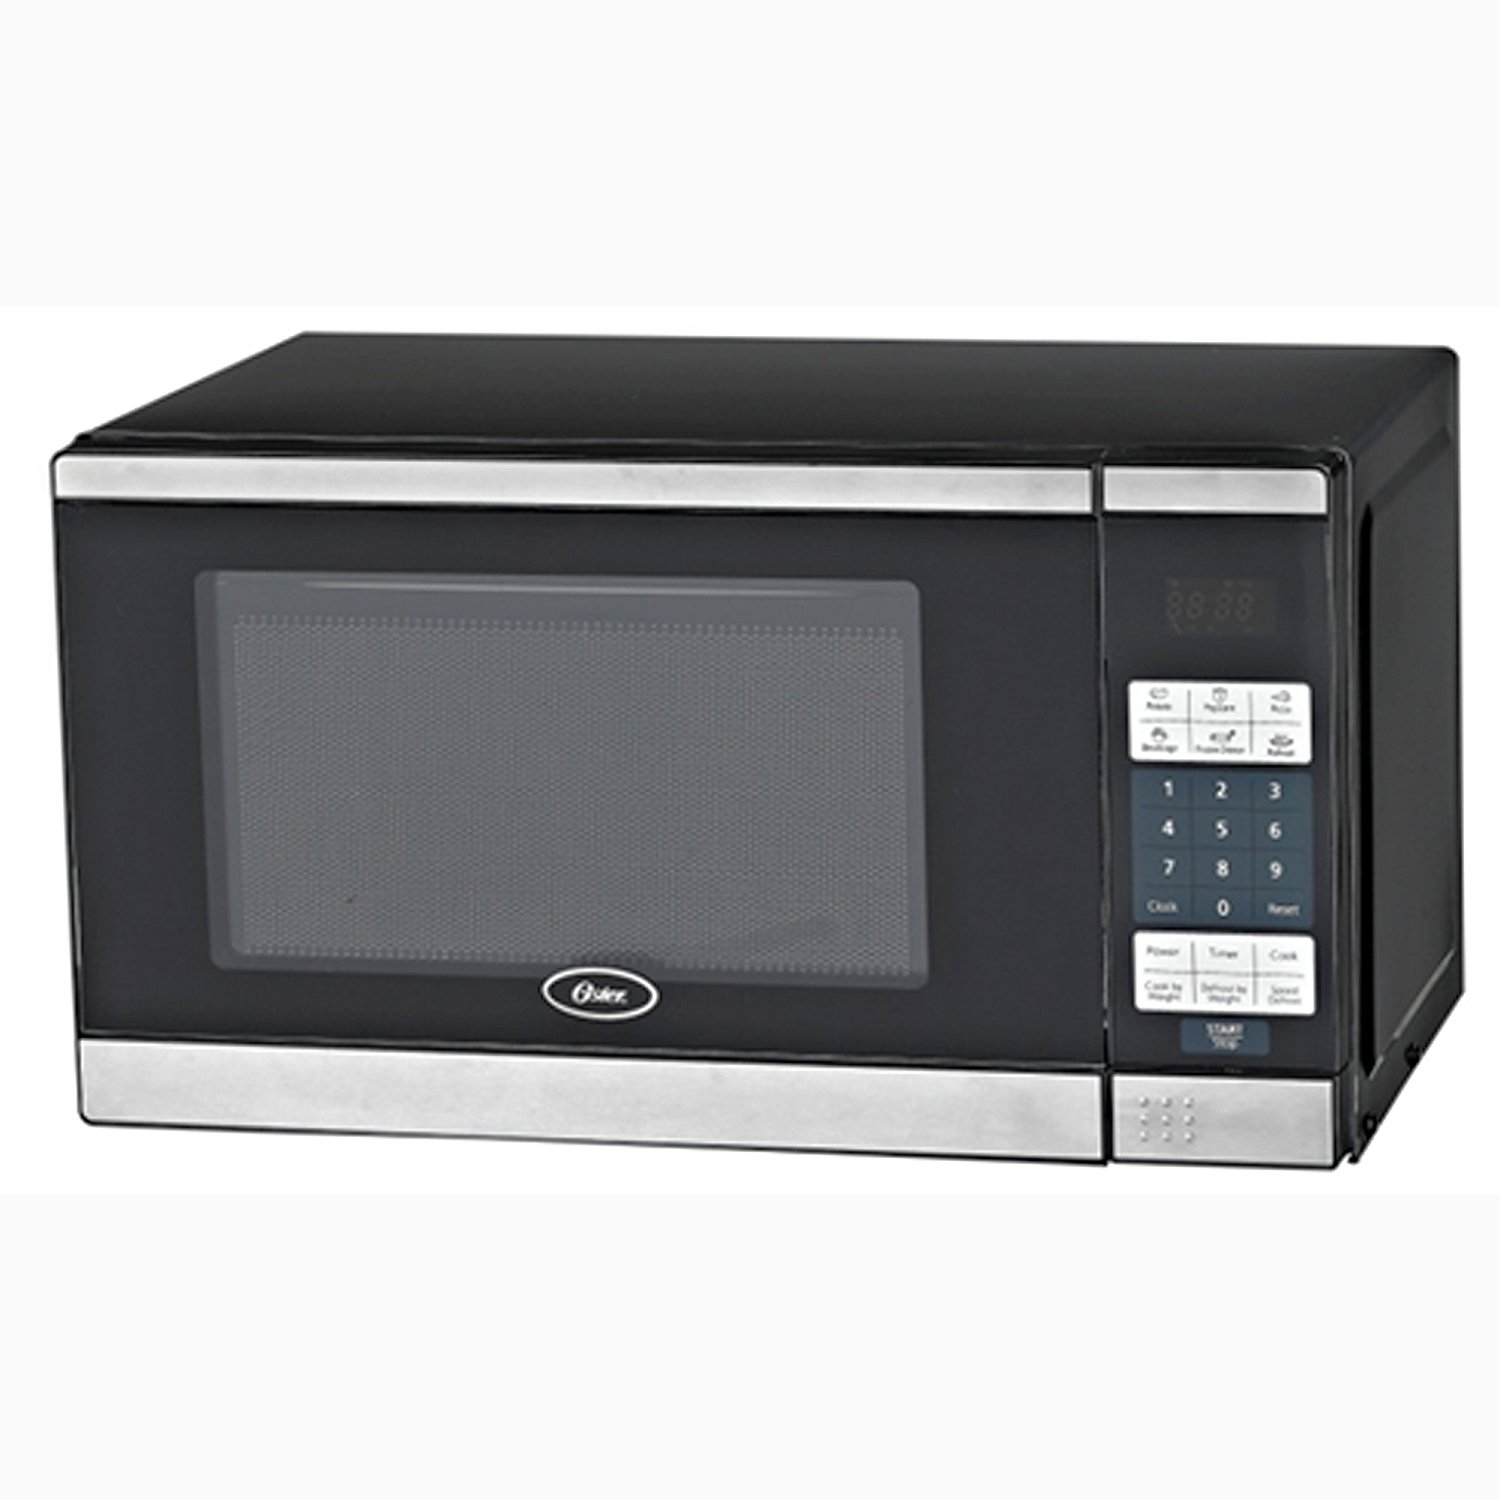 Oster 0.7 cu ft Microwave Oven, Stainless Steel and Black